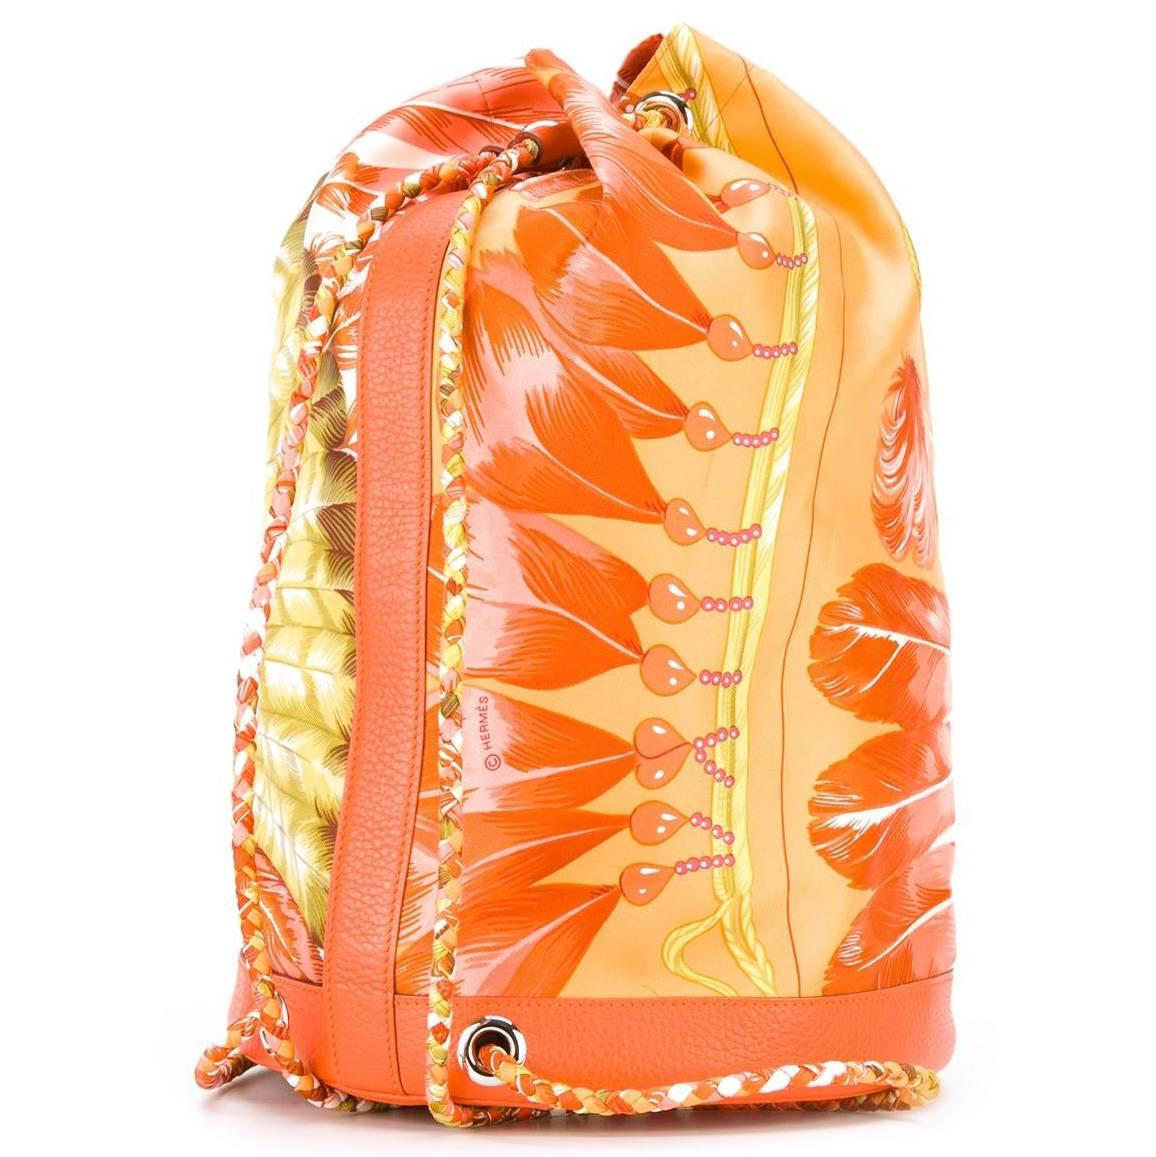 Exude tropical fantasies with this vintage Hermès backpack. A sun-soaked pattern in shades of orange and green features across the bag's drawstring profile. It is printed with the word Brazil, and the Hermès logo. The backpack straps are woven,